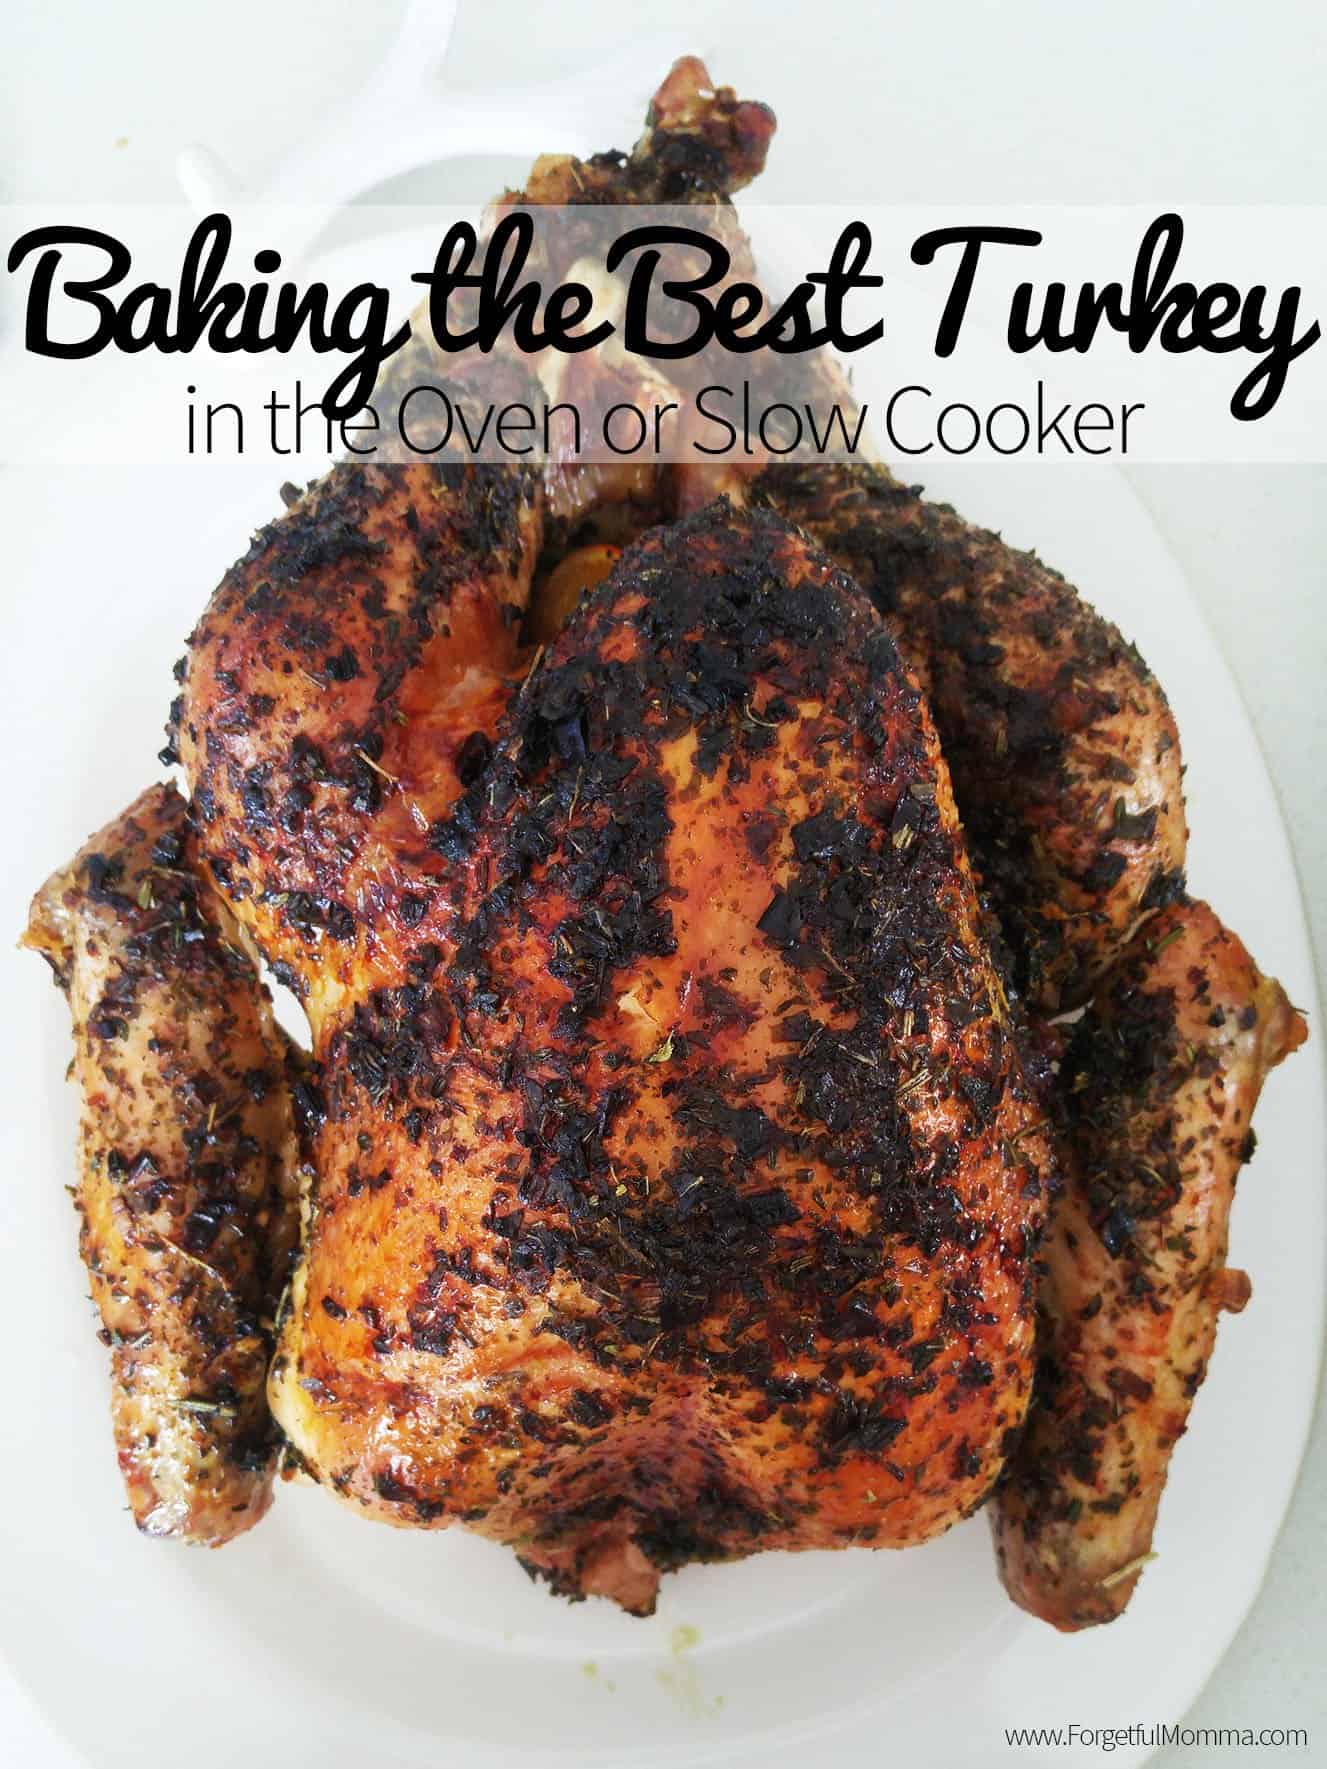 Baking the Best Turkey in the Oven or Slow Cooker